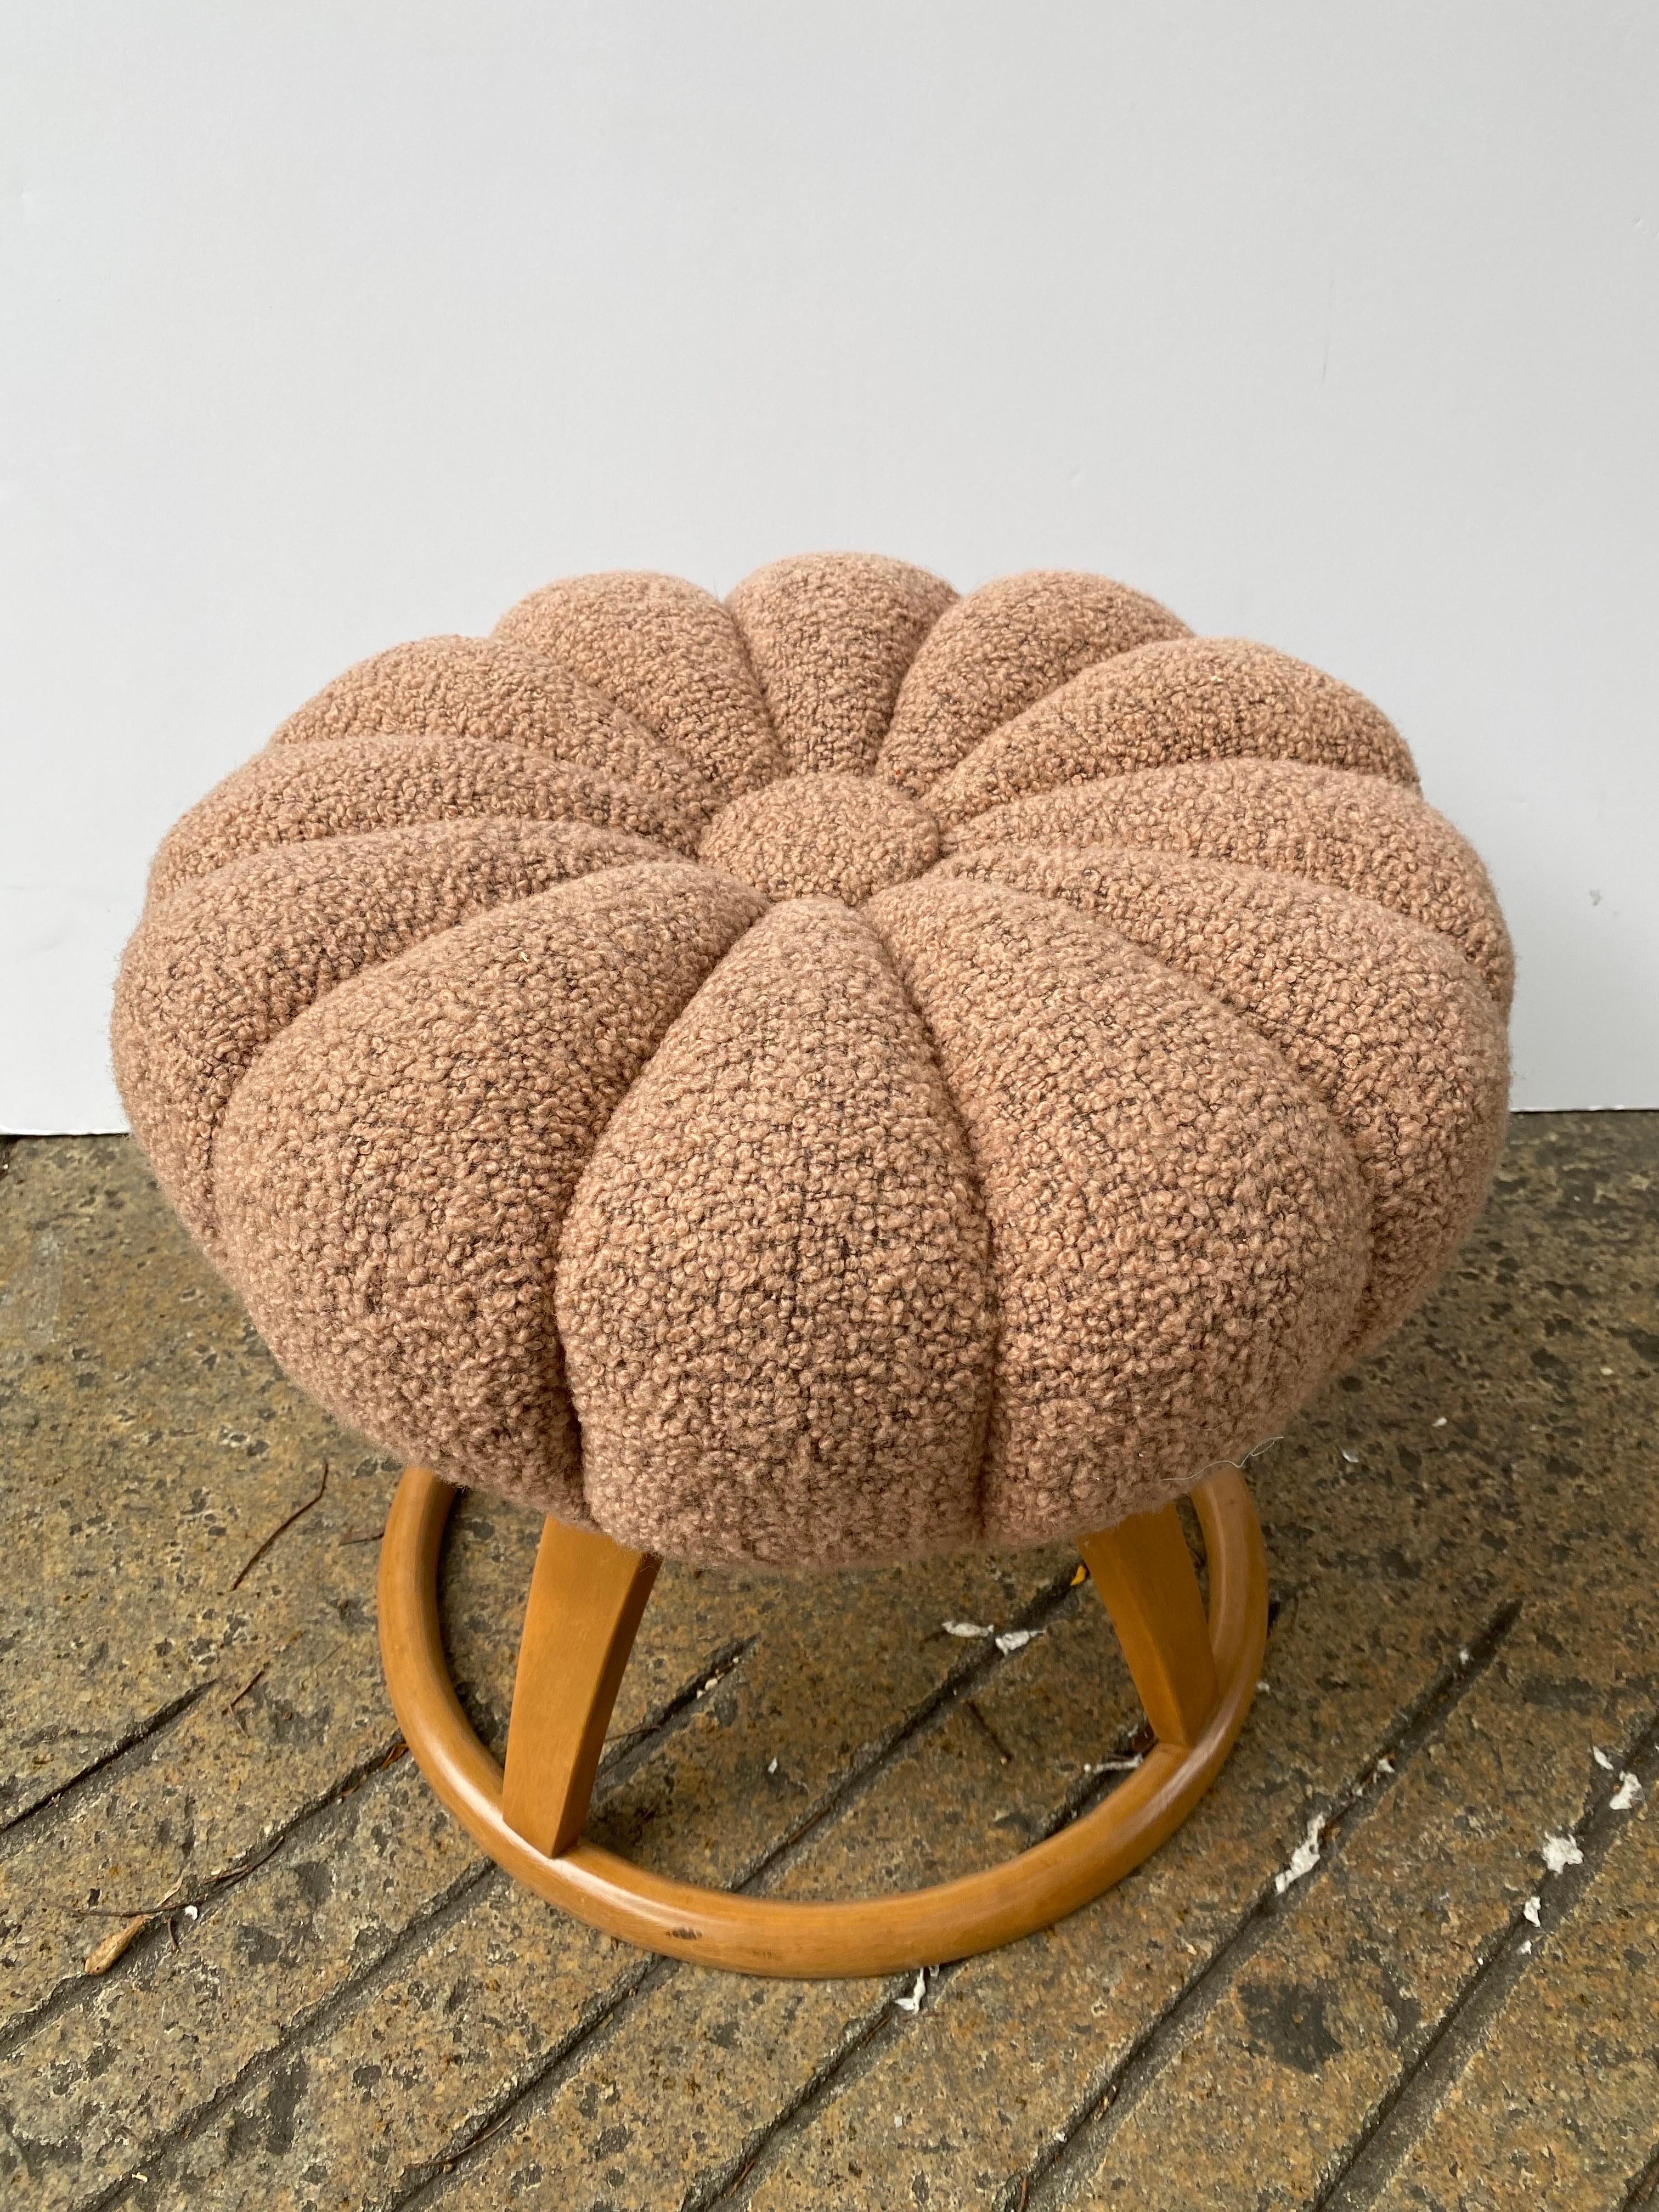 Heywood Wakefield Poof or Vanity Stool, newly refinished and reupholstered.  Salmon vintage nubby fabric on the seat cover.
